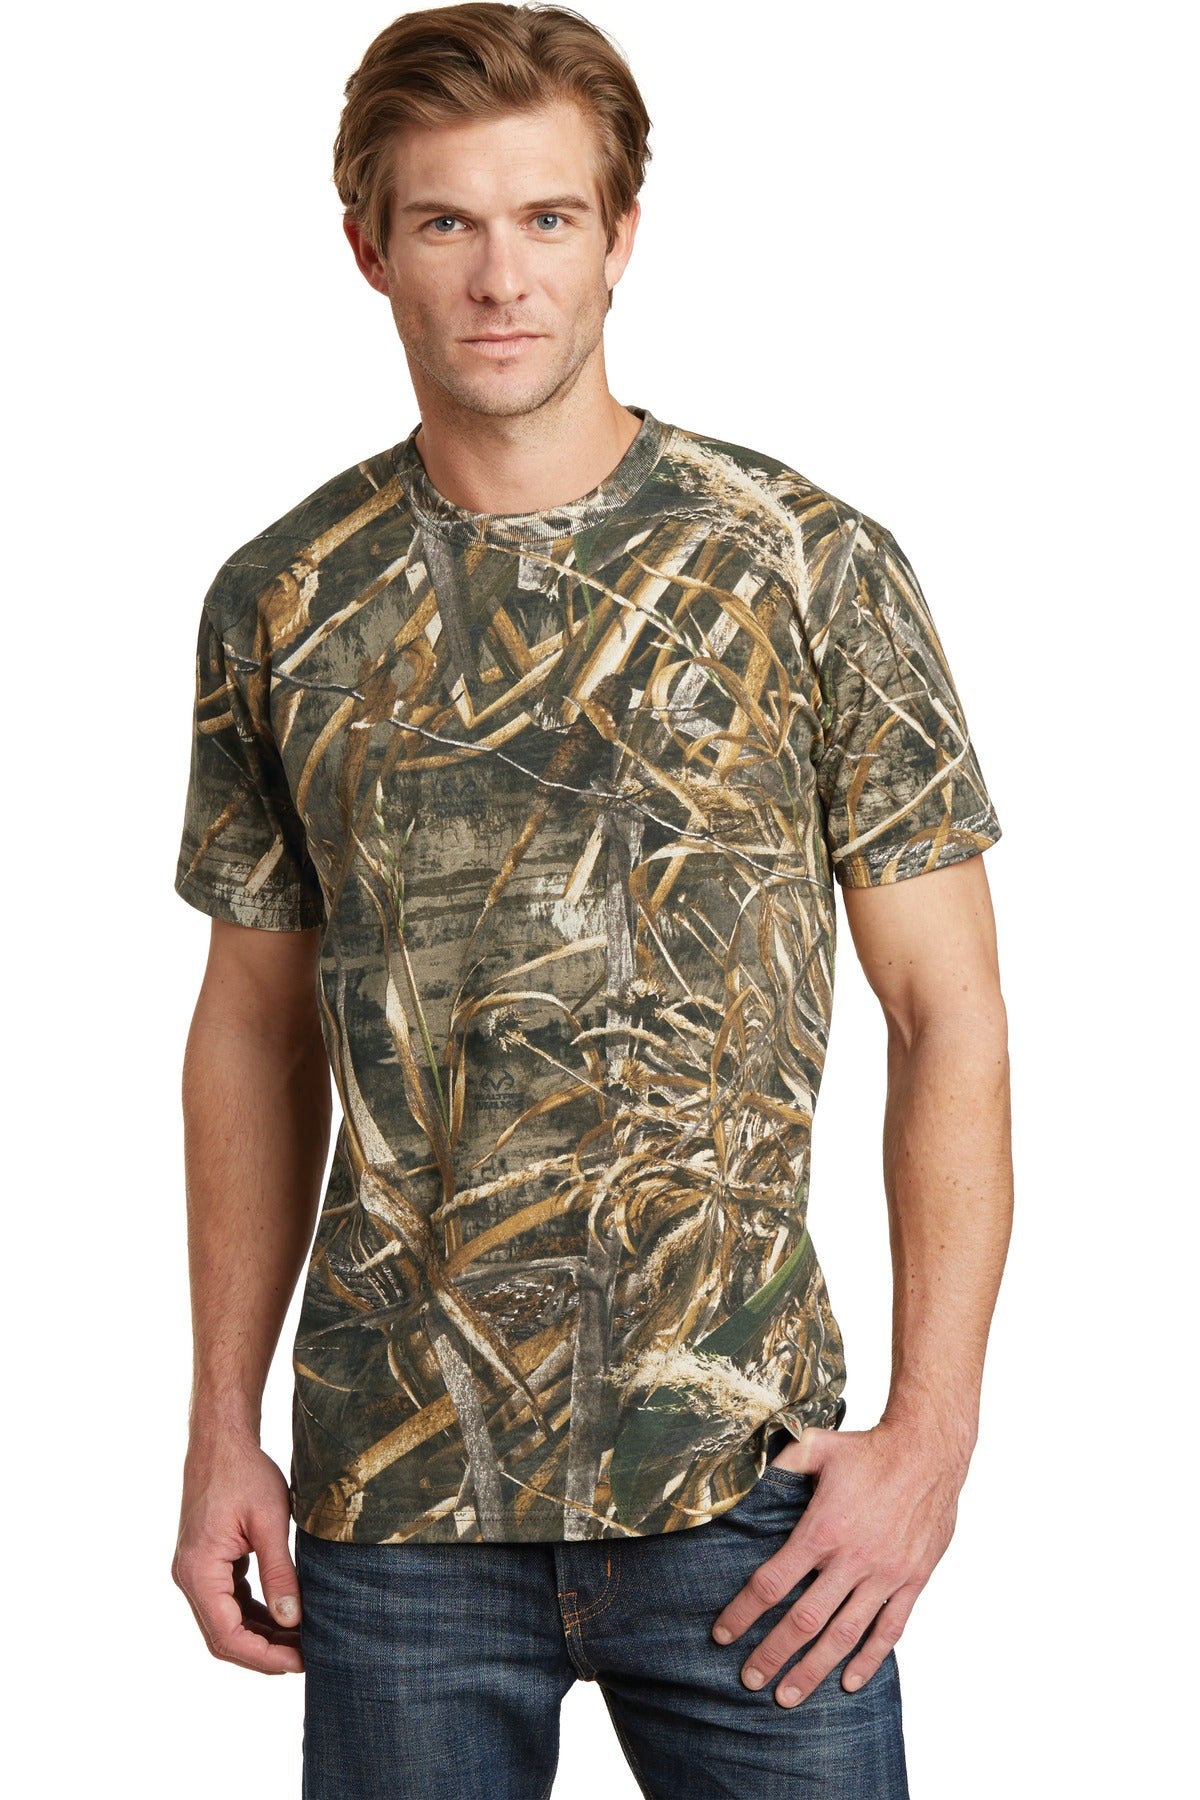 Photo of Russell Outdoors T-Shirts NP0021R  color  Realtree Max 5